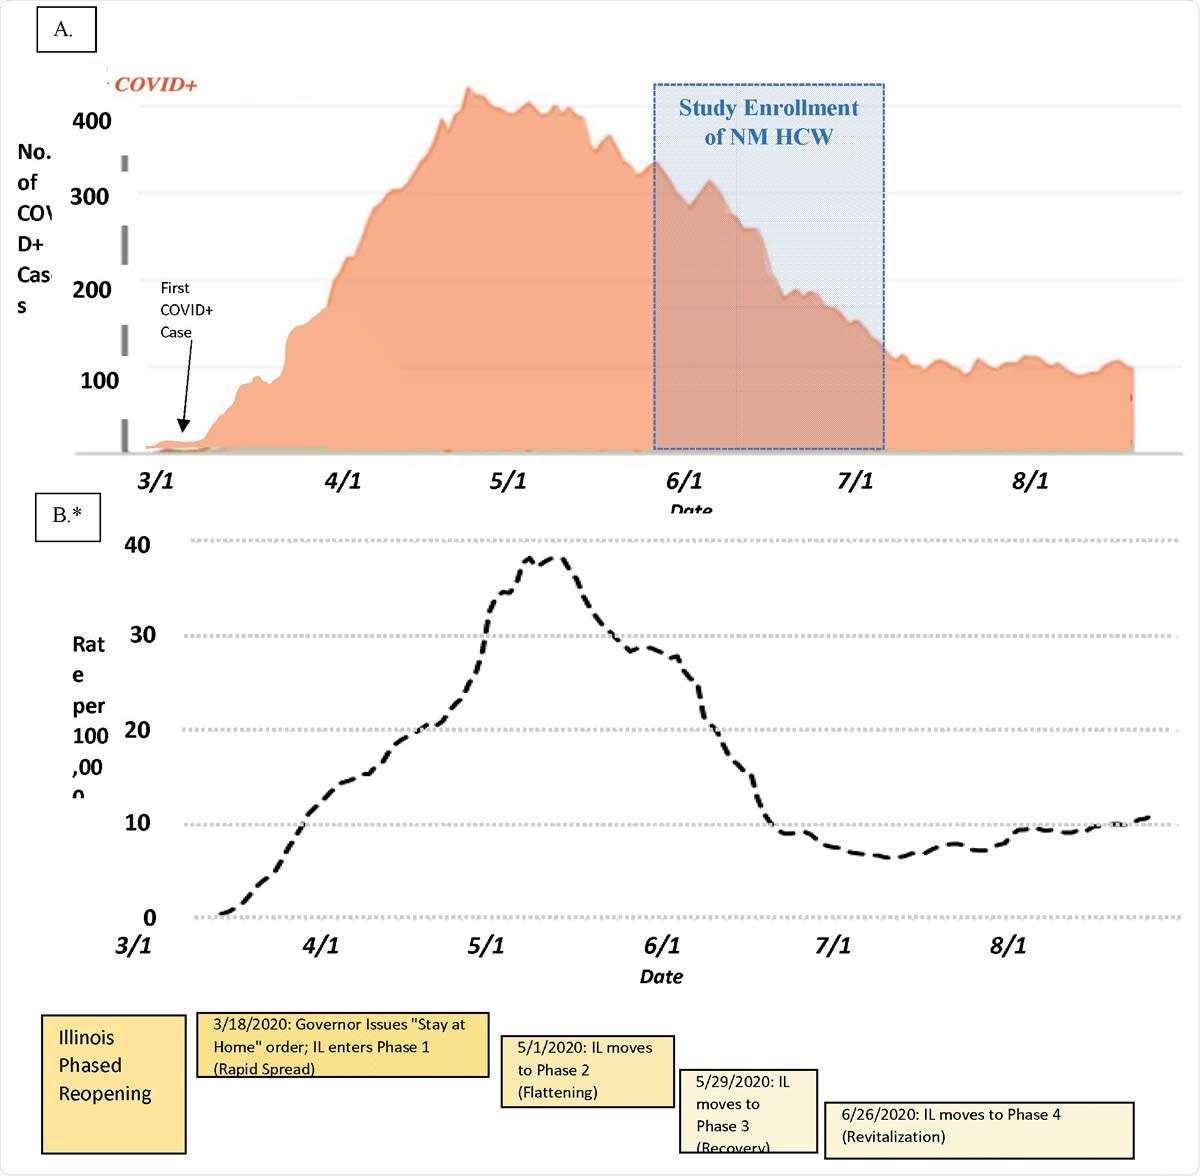 Timeline of Northwestern Medicine COVID-19 Inpatient Census, Chicago Case Rate, and state government response during the local accelerated phase of the pandemic